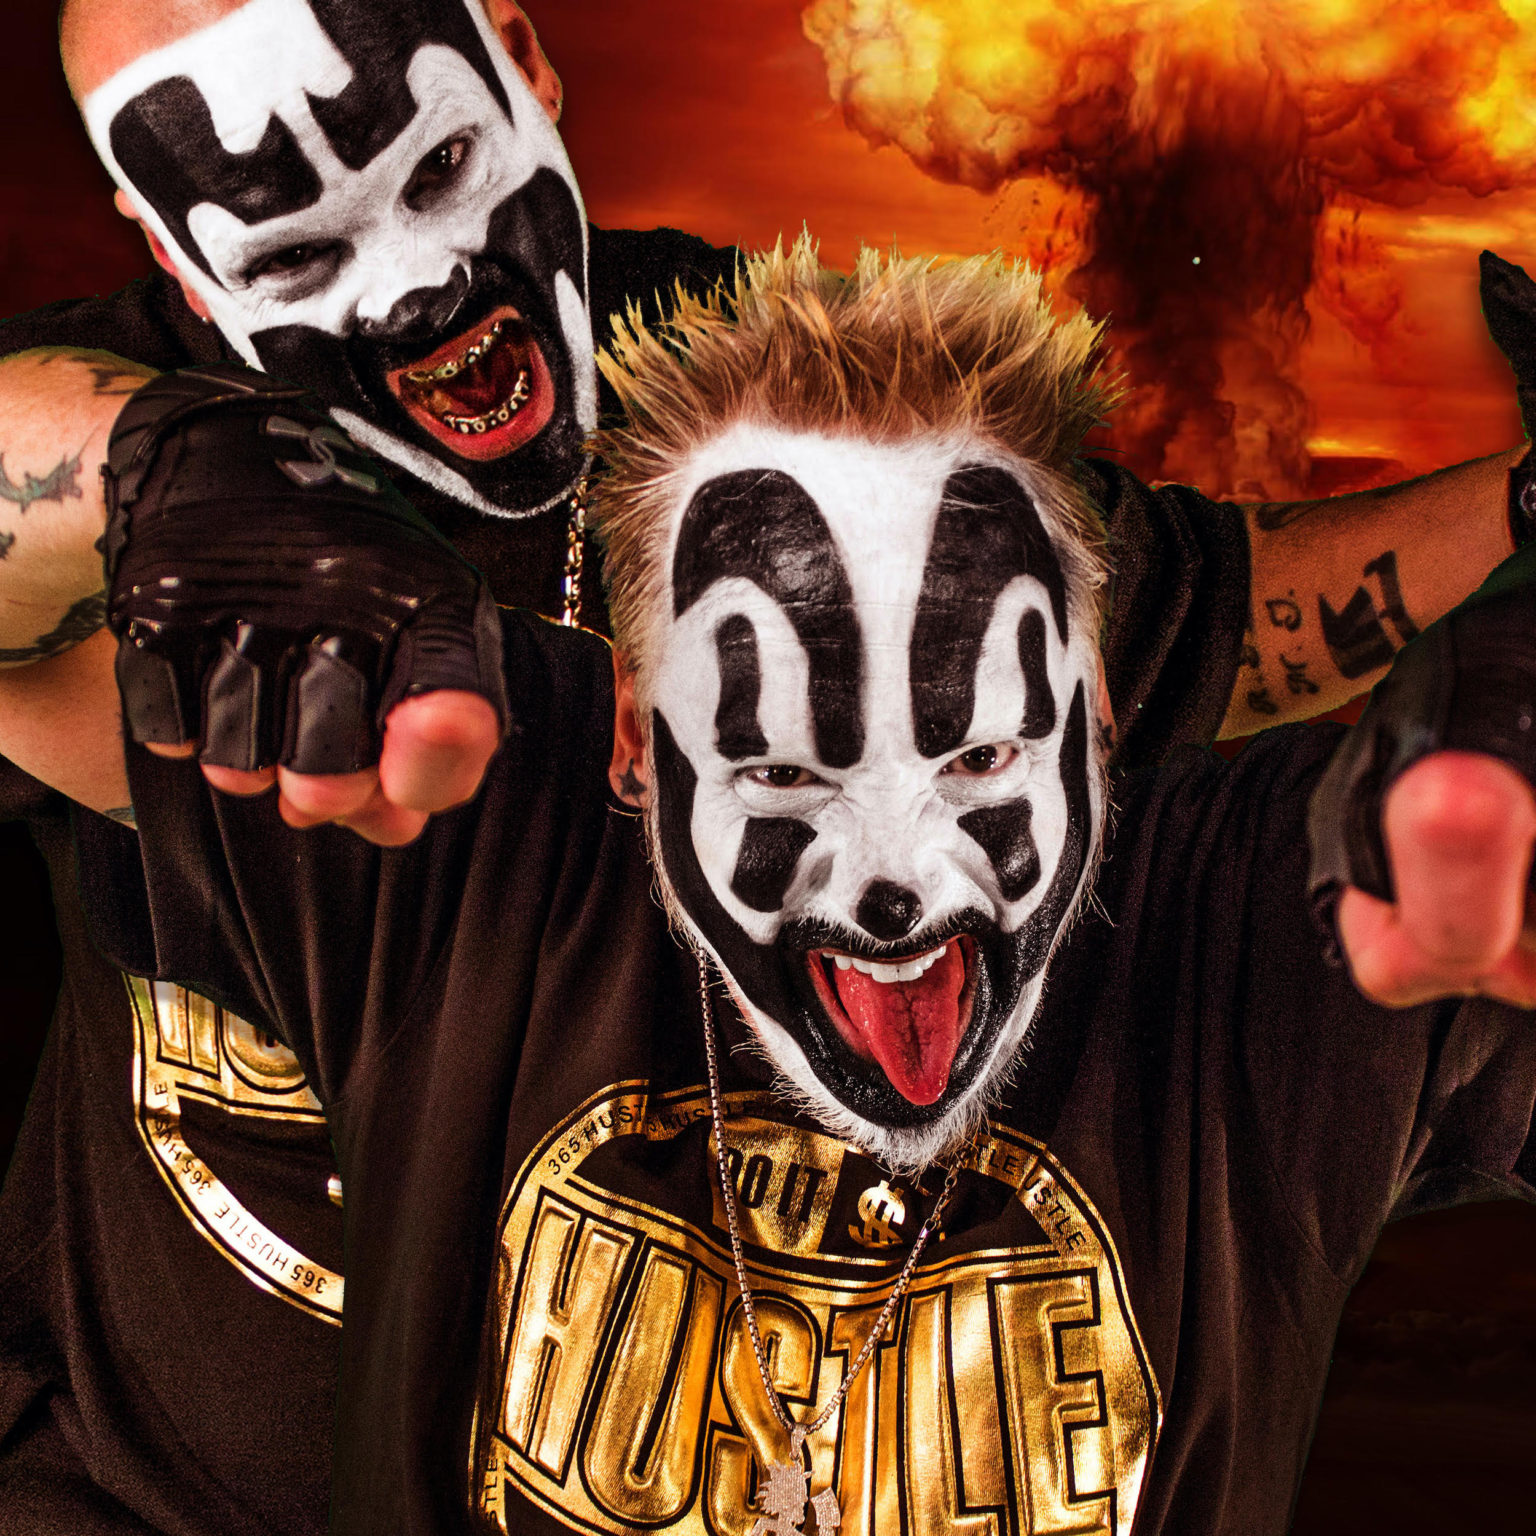 Insane Clown Posse Are Returning to the Road This Spring.